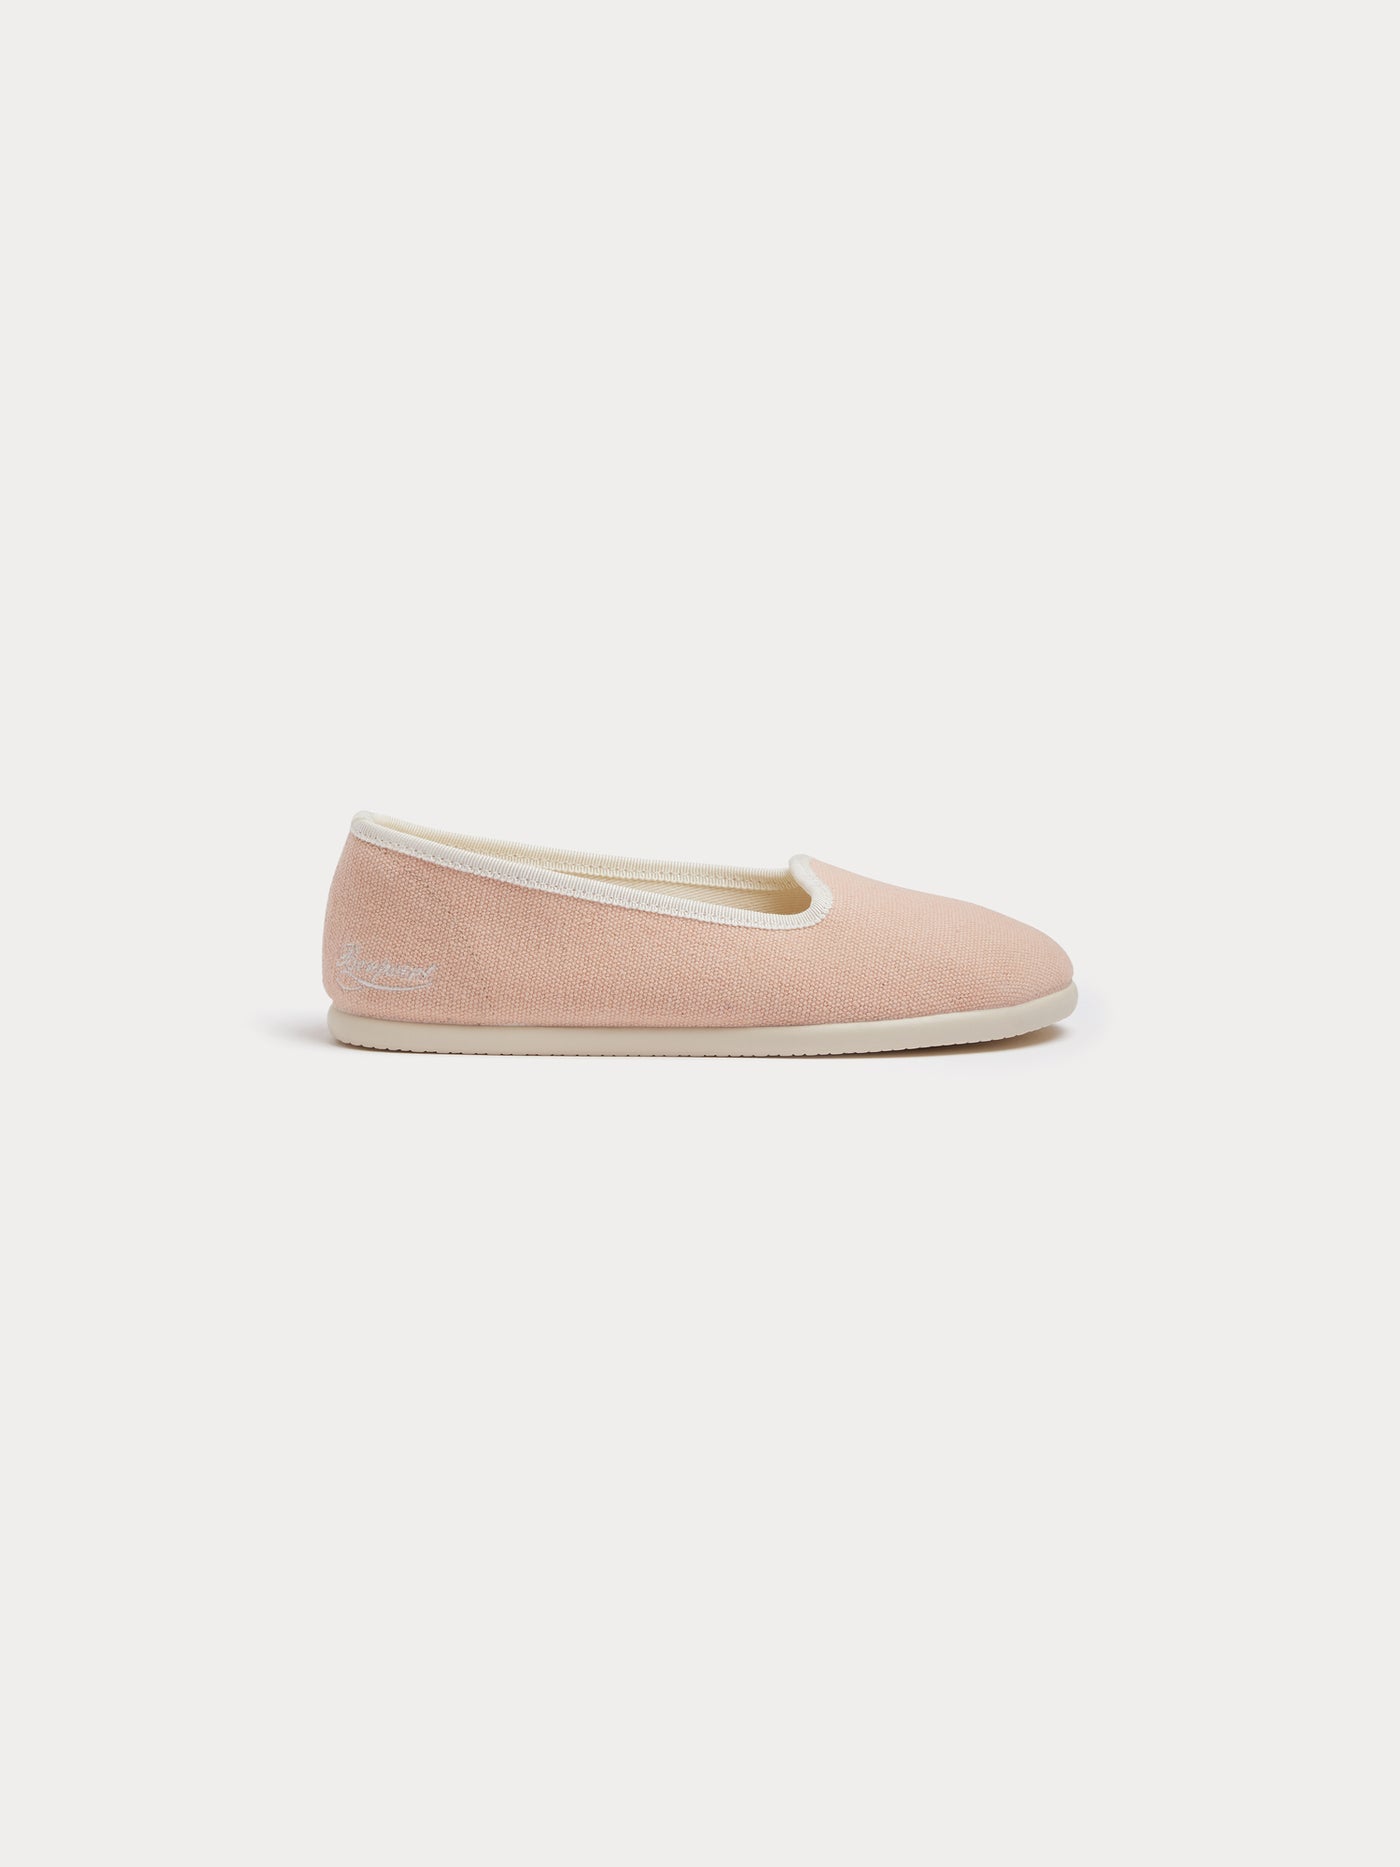 Chaussons Tenise beige rose